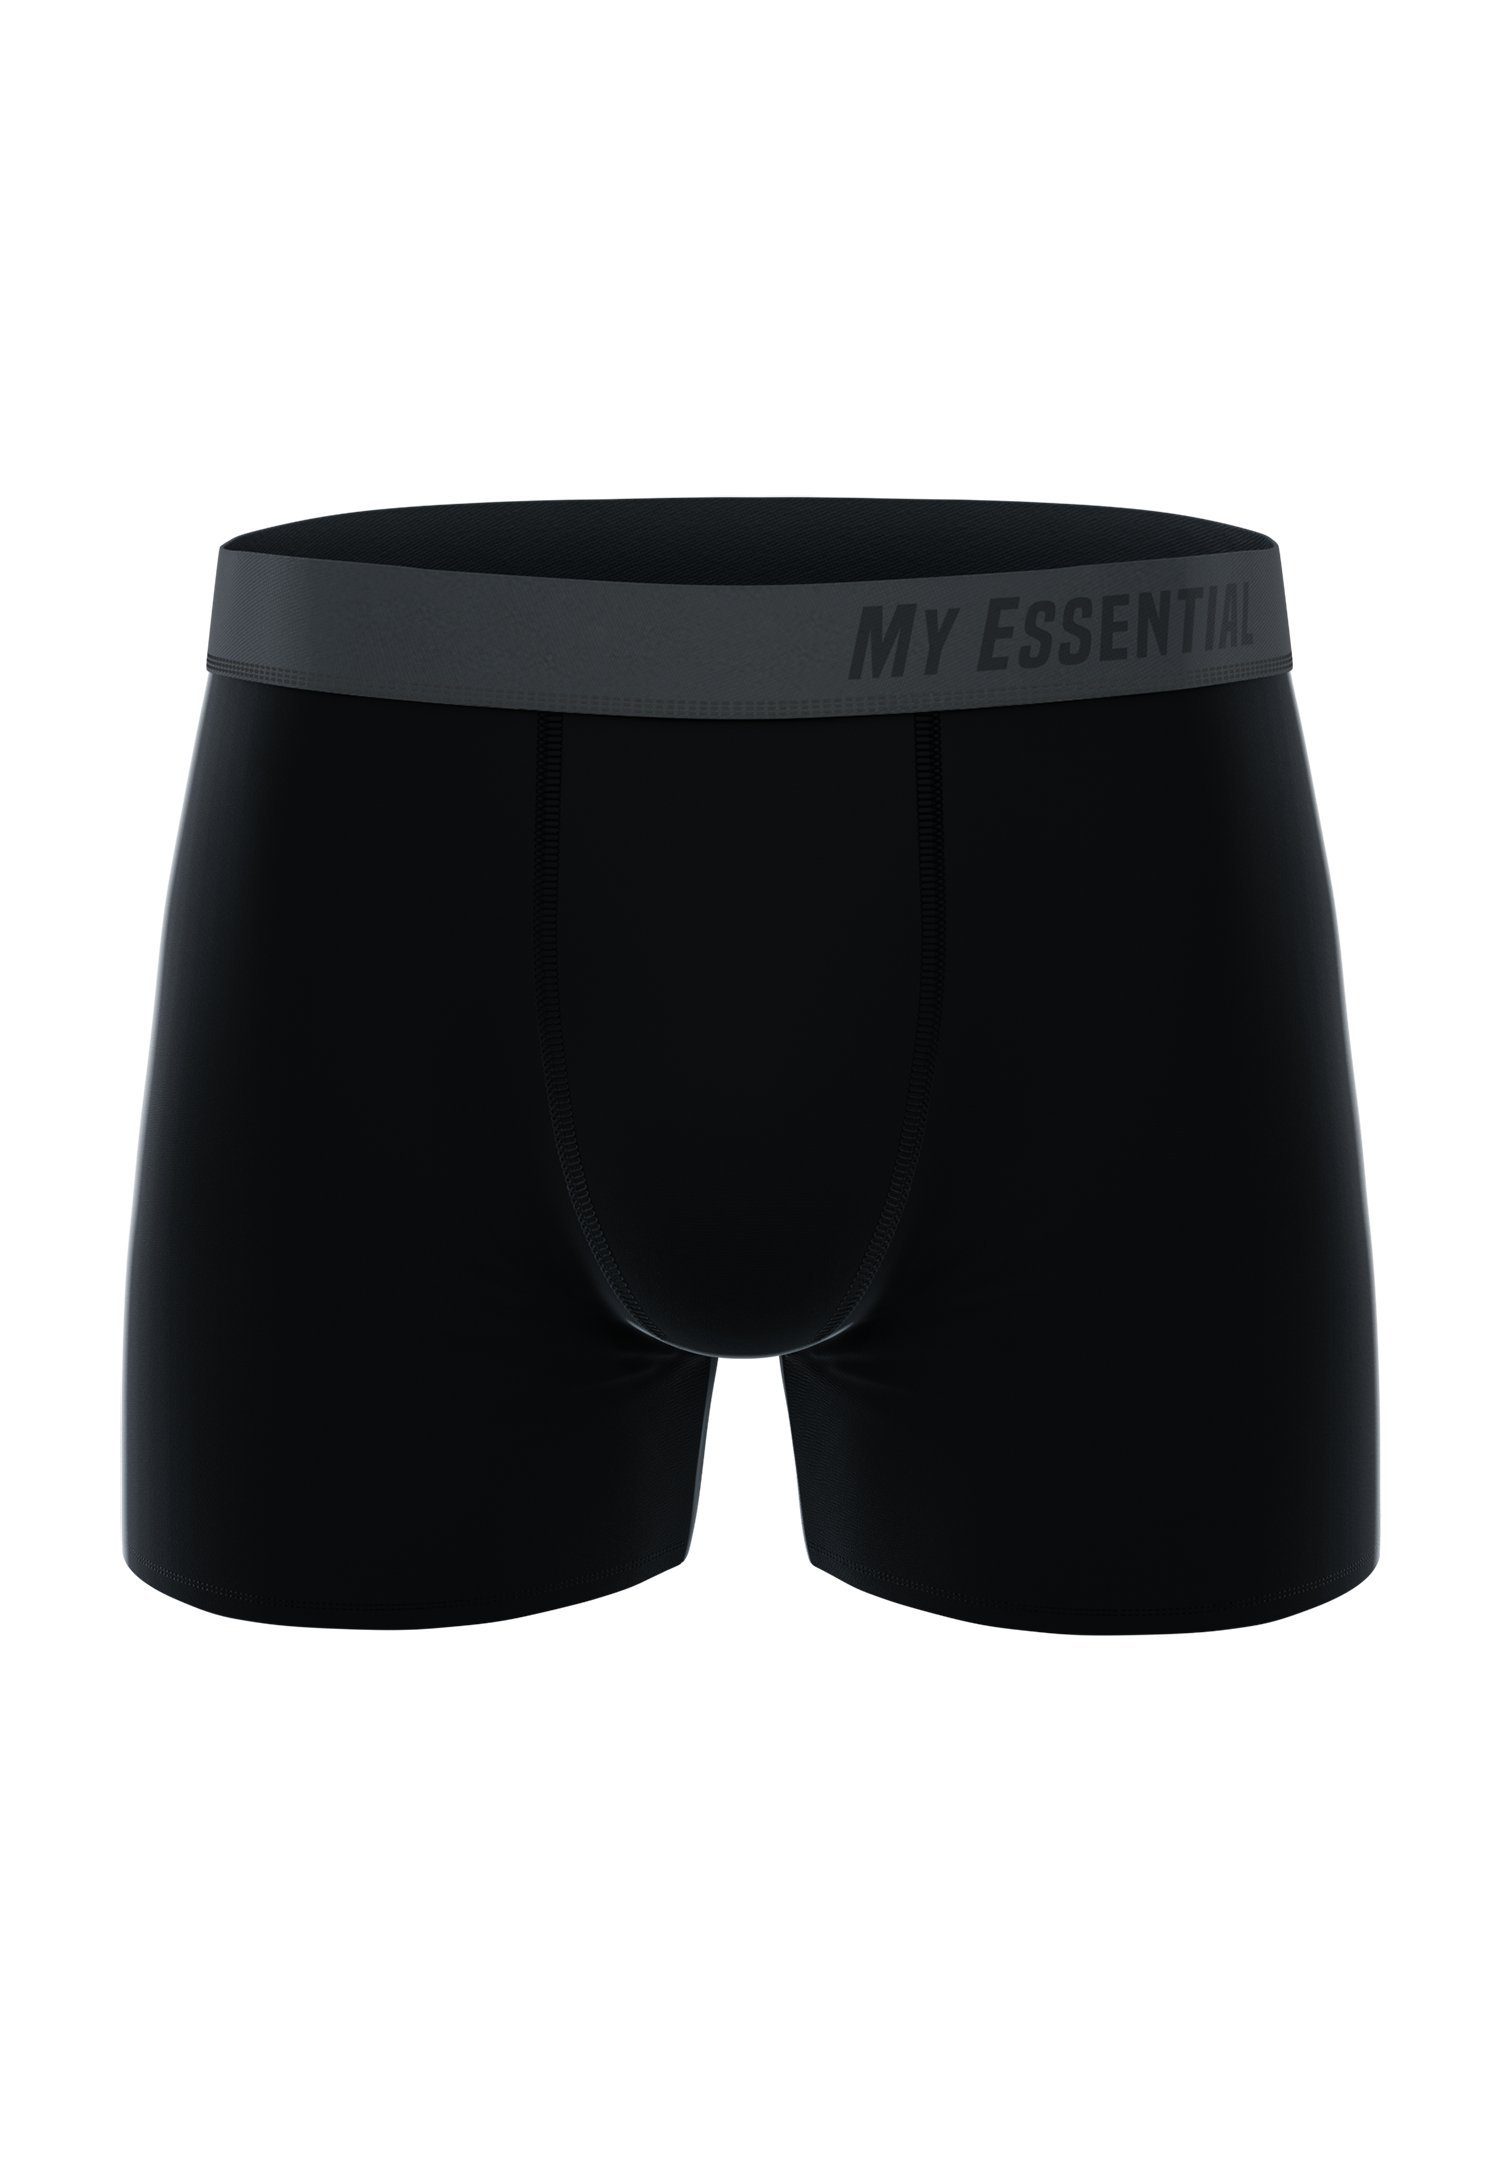 Essential Clothing 3er-Pack) Cotton Bio Essential Boxershorts 3-St., Pack My Red Boxers (Spar-Pack, 3 My